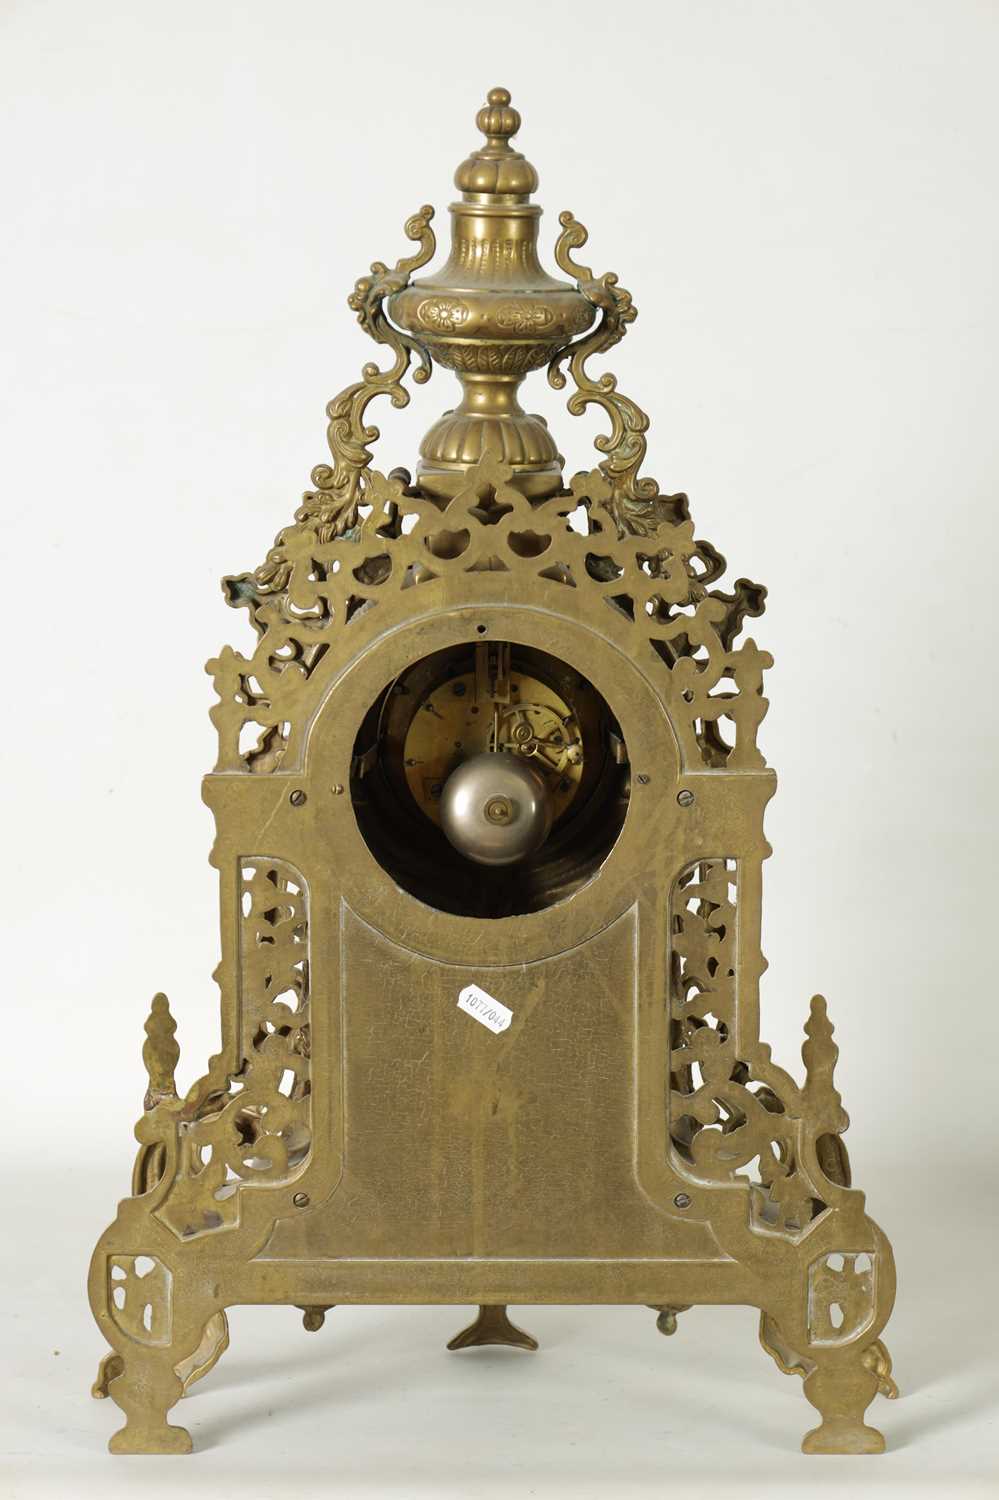 A LATE 19TH CENTURY FRENCH ORNATE AND PIERCED BRASS MANTEL CLOCK OF LARGE SIZE - Image 6 of 8